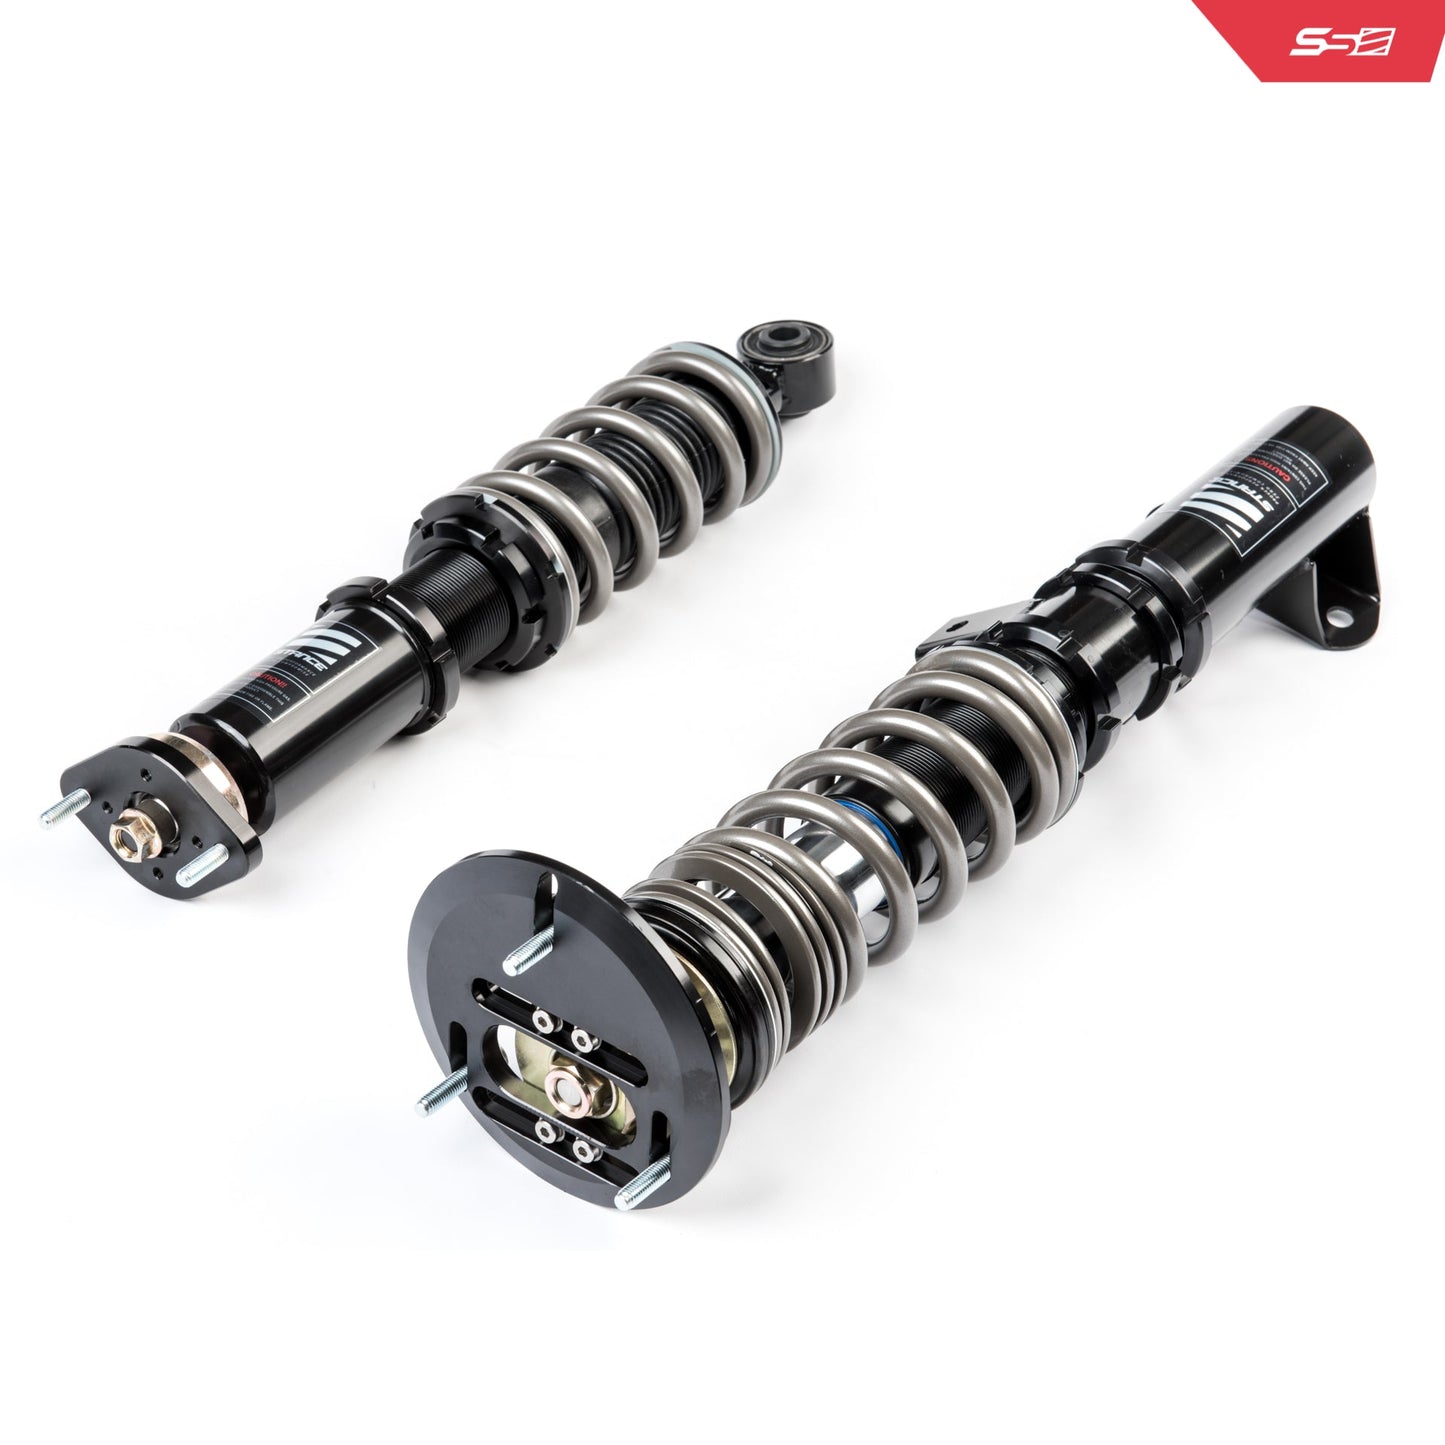 Stance Suspension - XR1 Coilovers for 92-99 BMW M3 E36 (ST-E36-XR1)